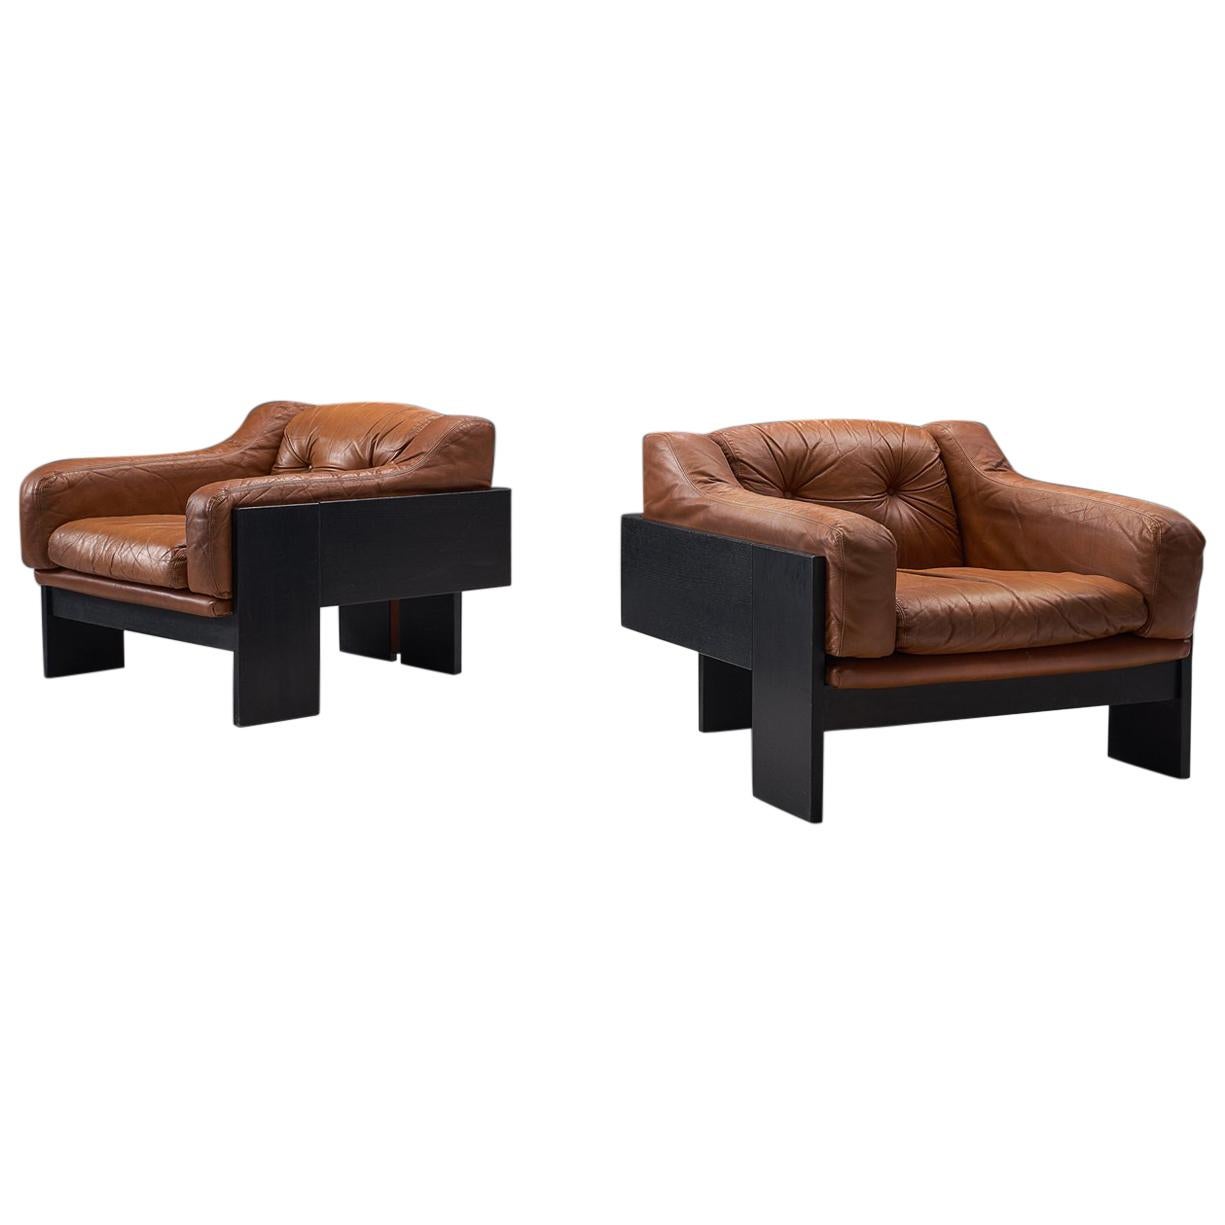 Claudio Salocchi Pair of 2 'Oriolo' Club Chairs in Cognac Leather